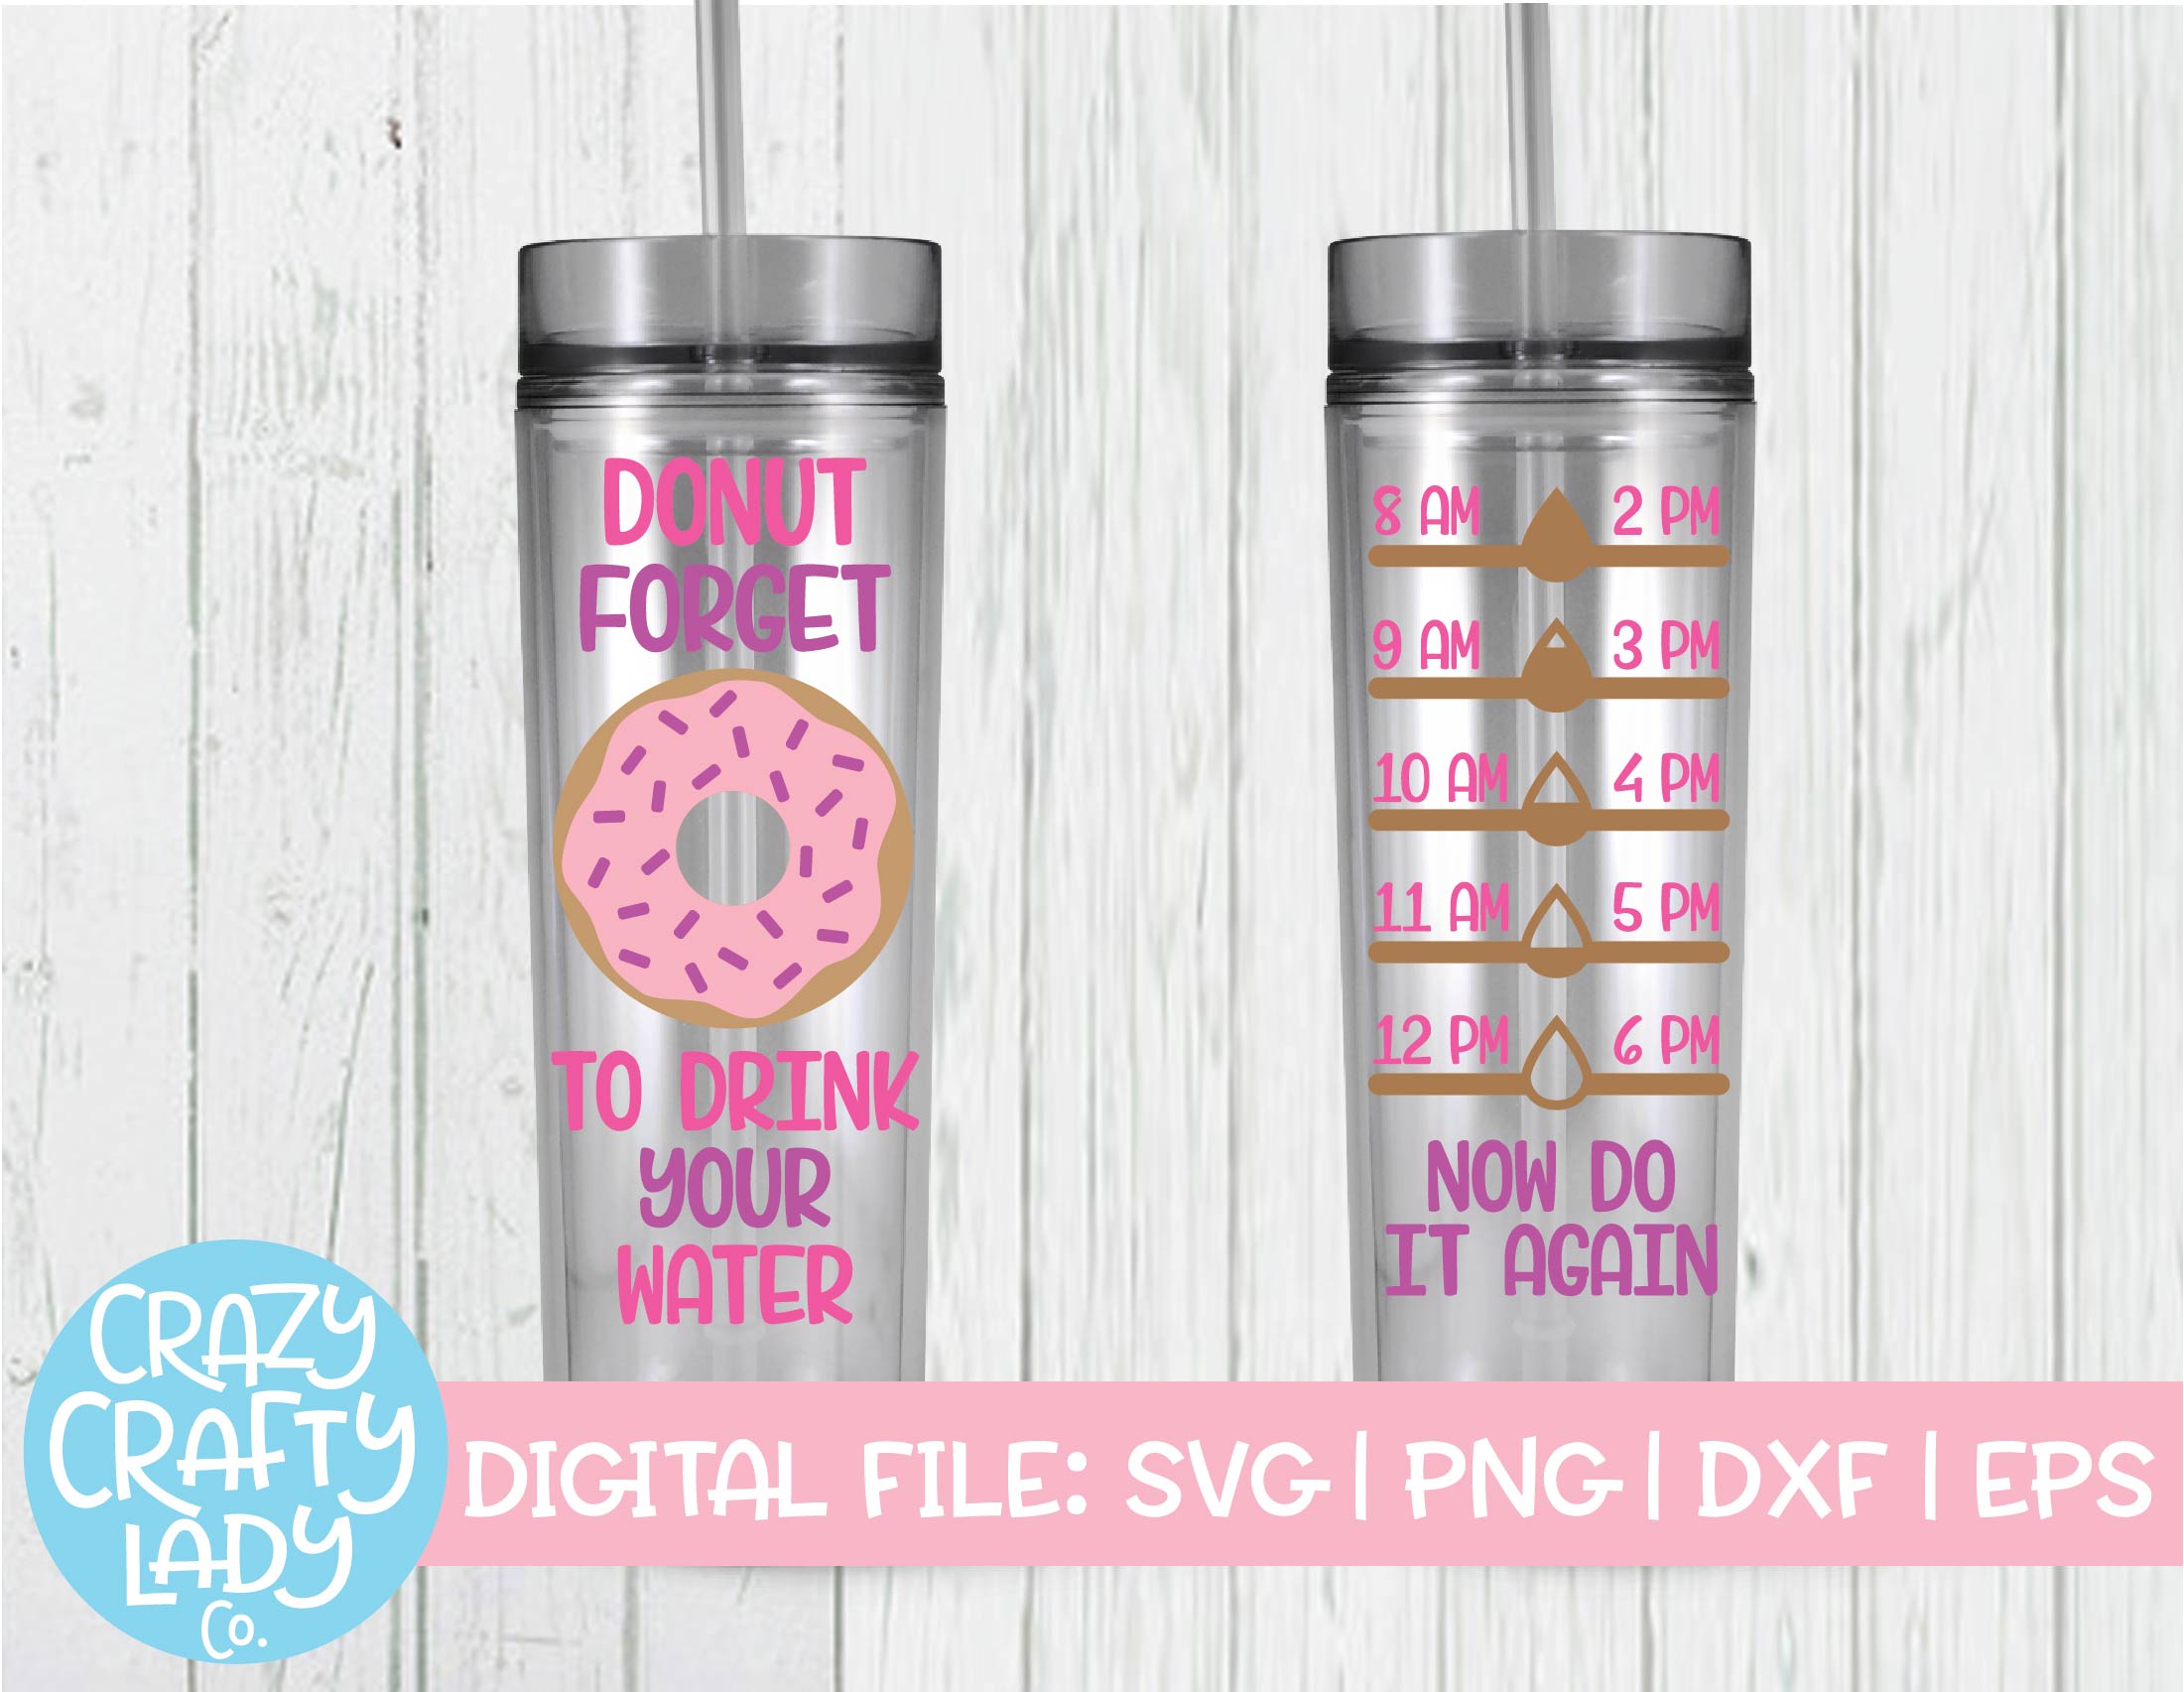 Download Donut Forget To Drink Your Water Bottle Tracker Svg Cut File Crazy Crafty Lady Co